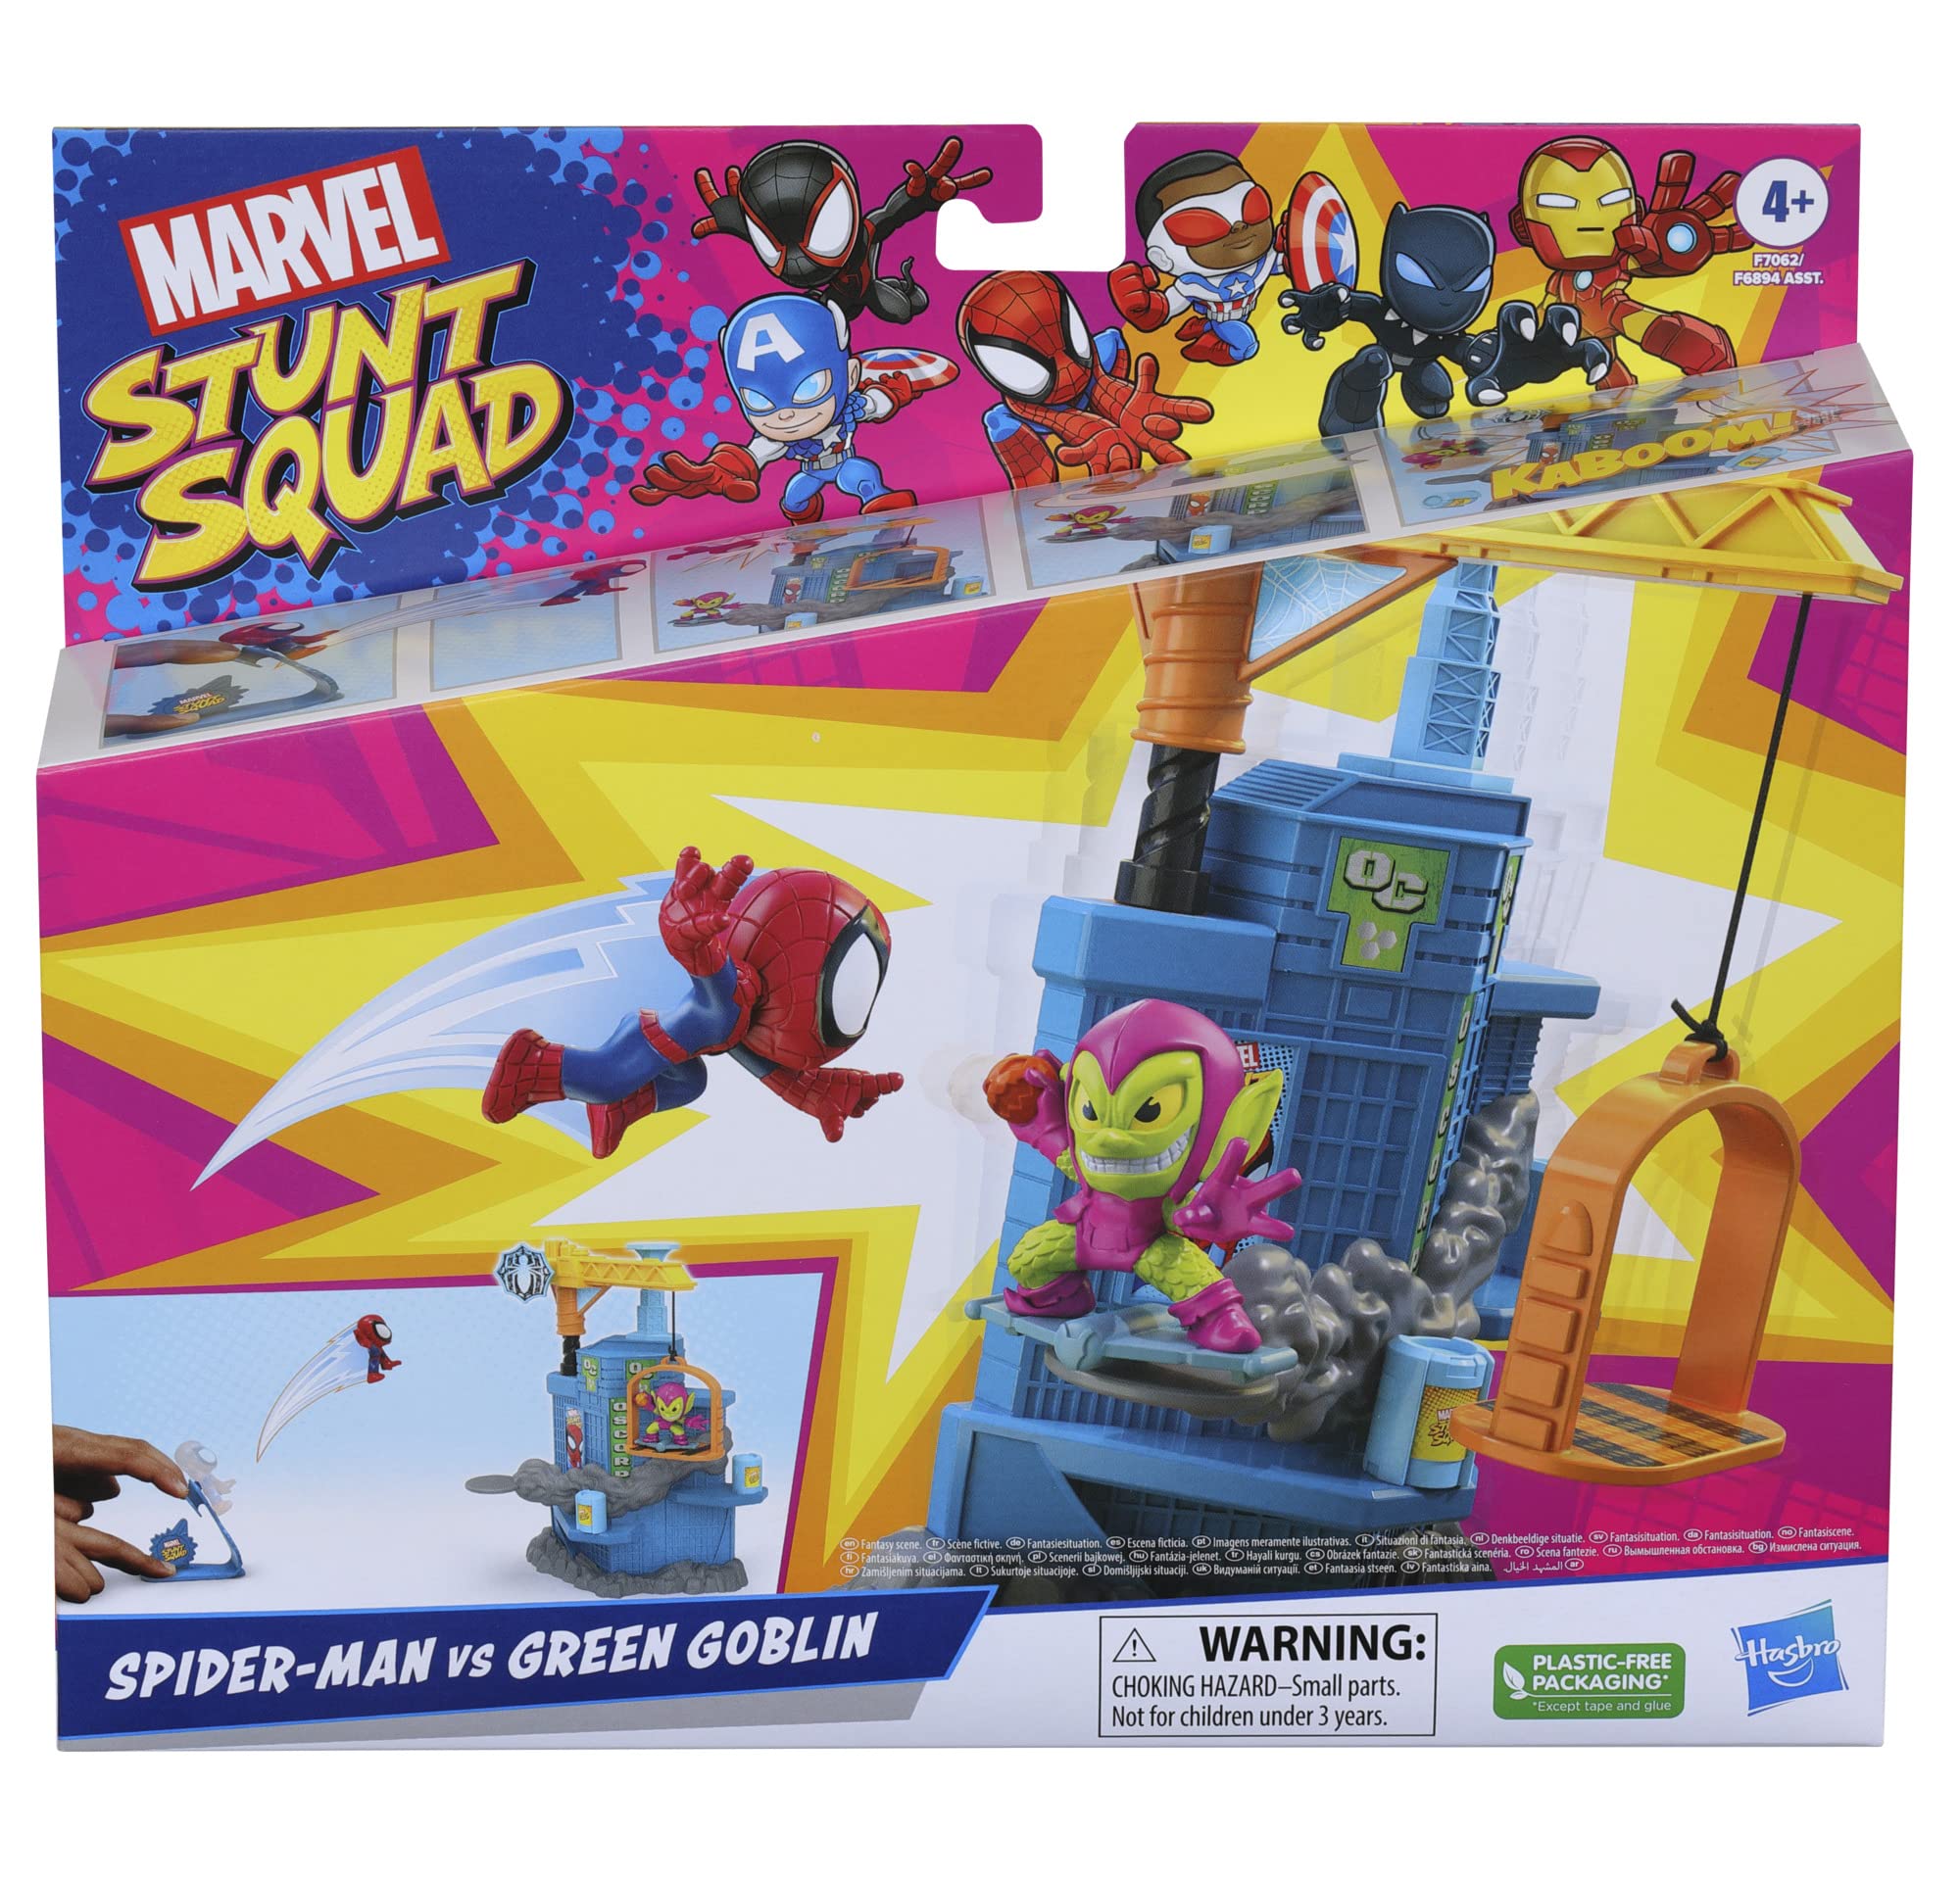 Marvel Stunt Squad Crane Smash Playset, Spider-Man vs. Green Goblin, 1.5-Inch Super Hero Action Figures, Toys for Kids Ages 4 and Up